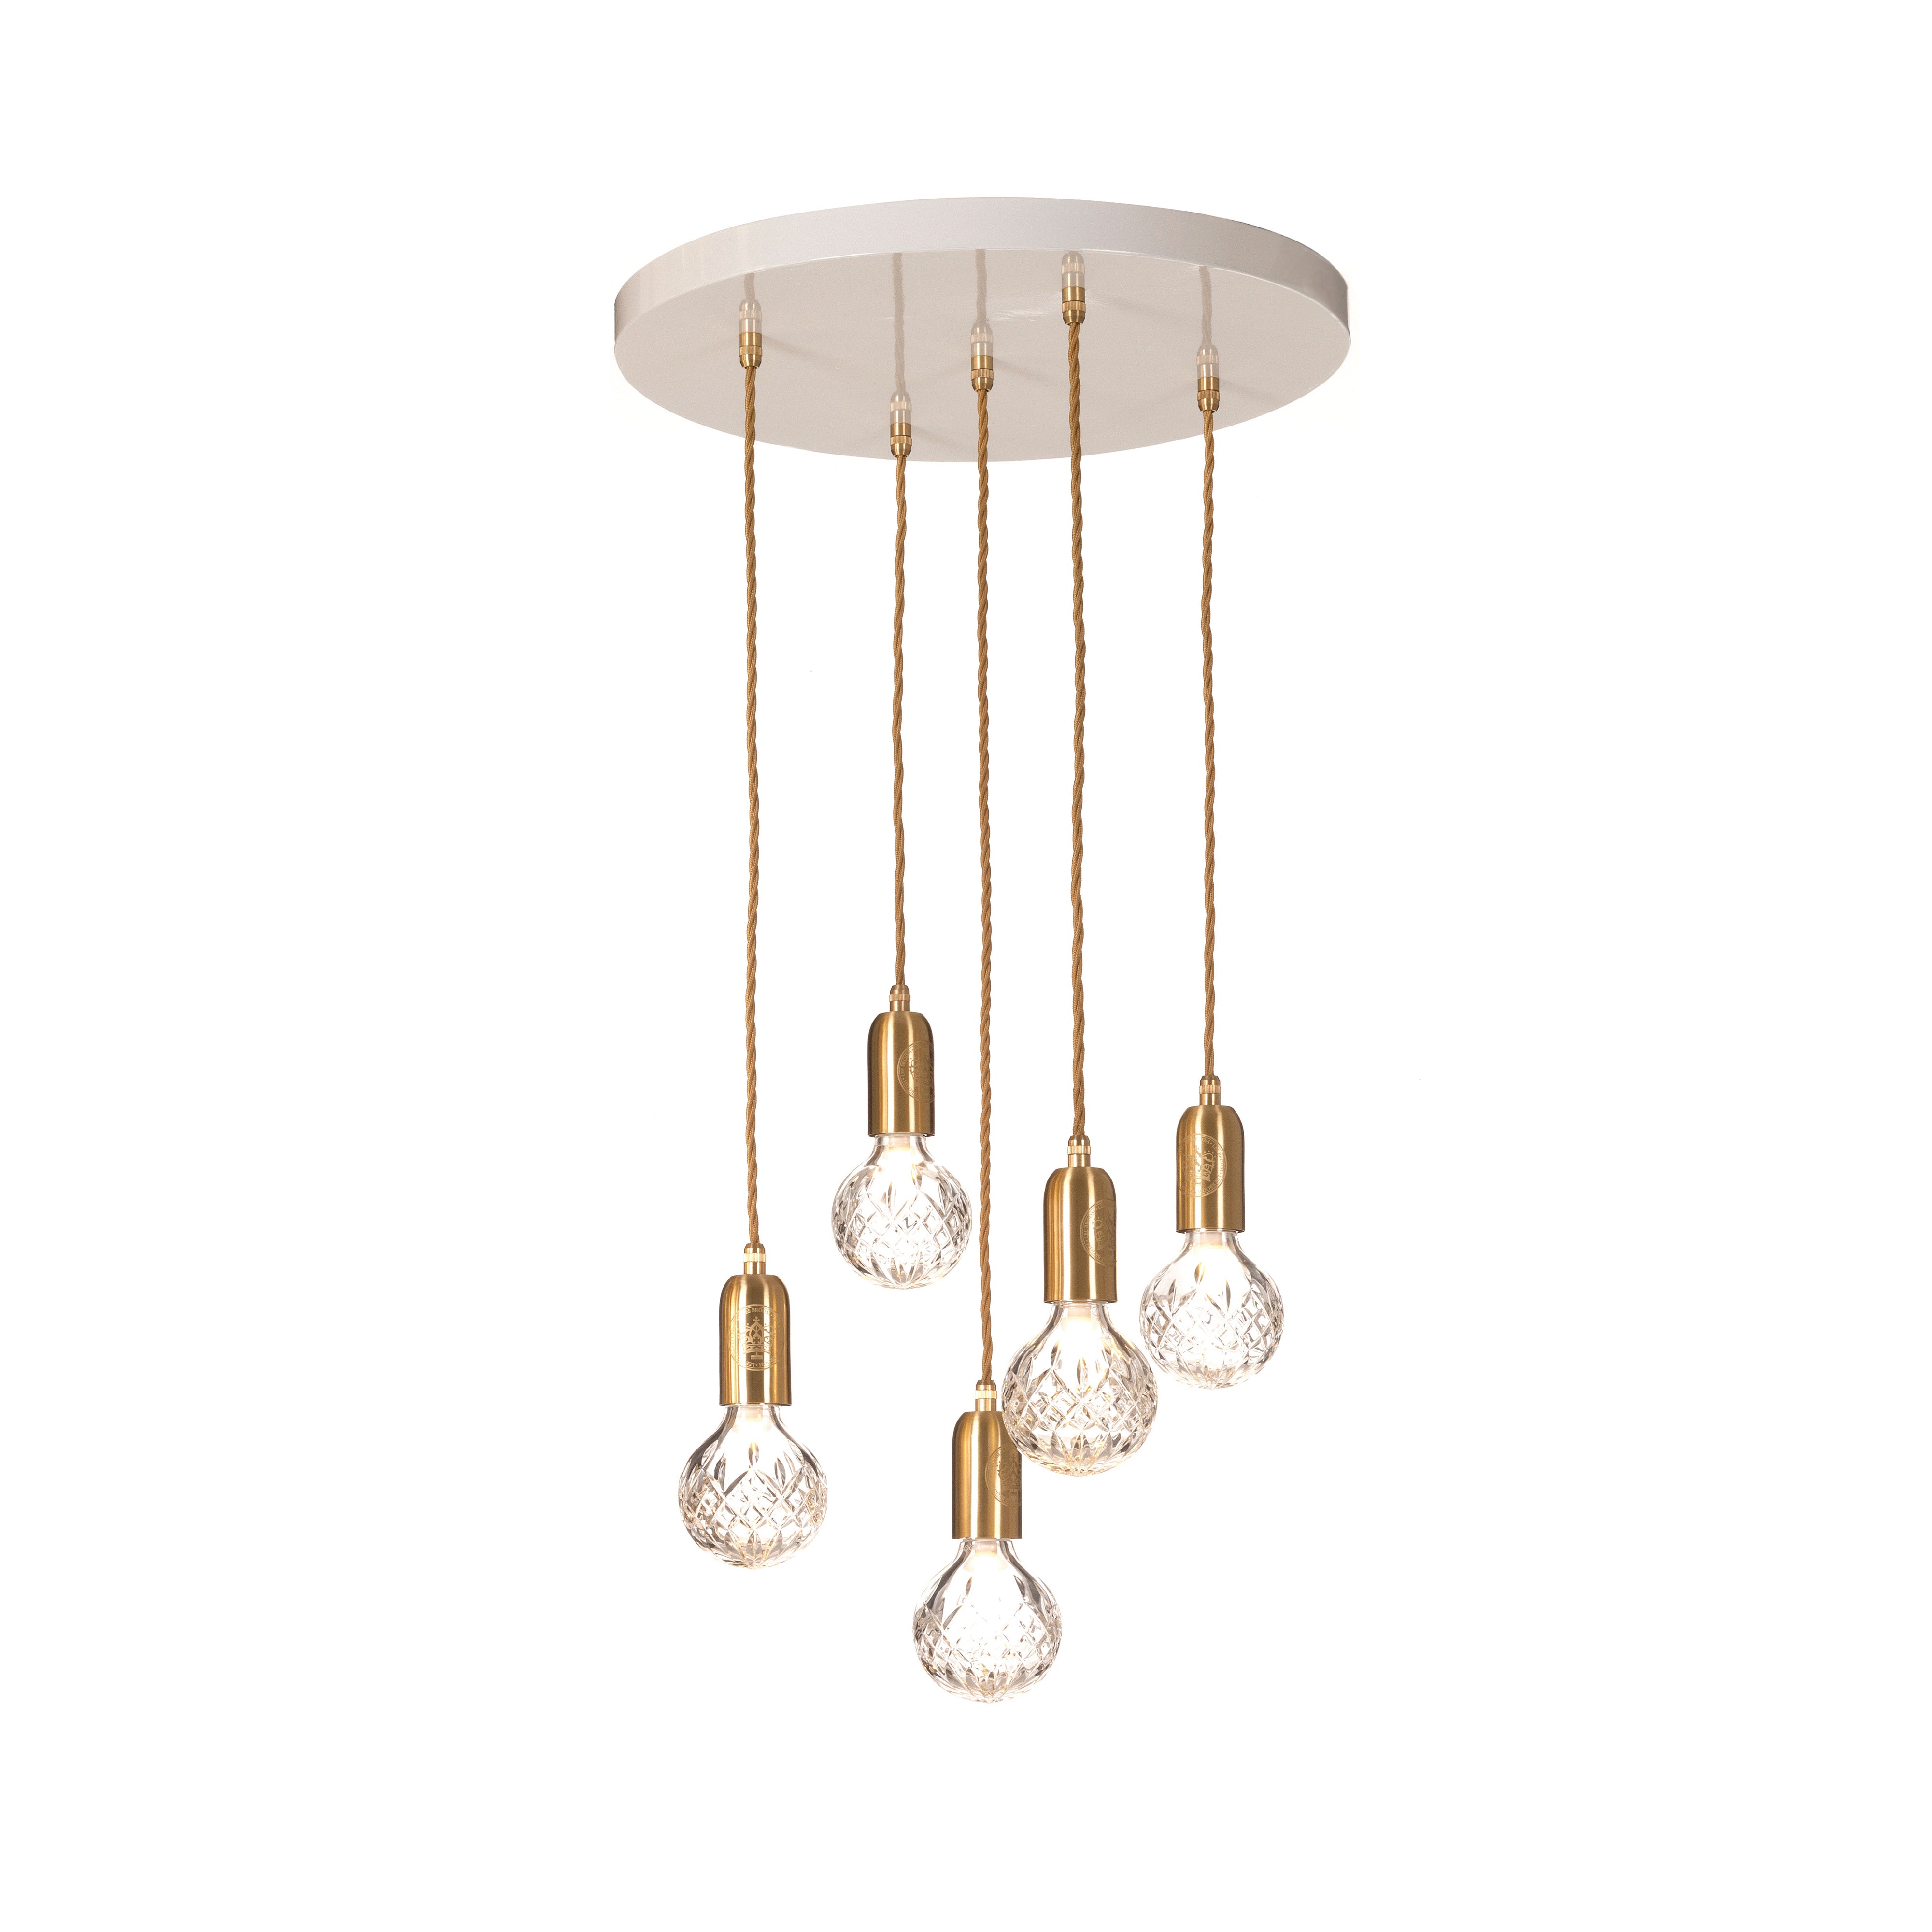 Crystal Bulb Chandelier: 5 Bulb + Brushed Brass + Clear